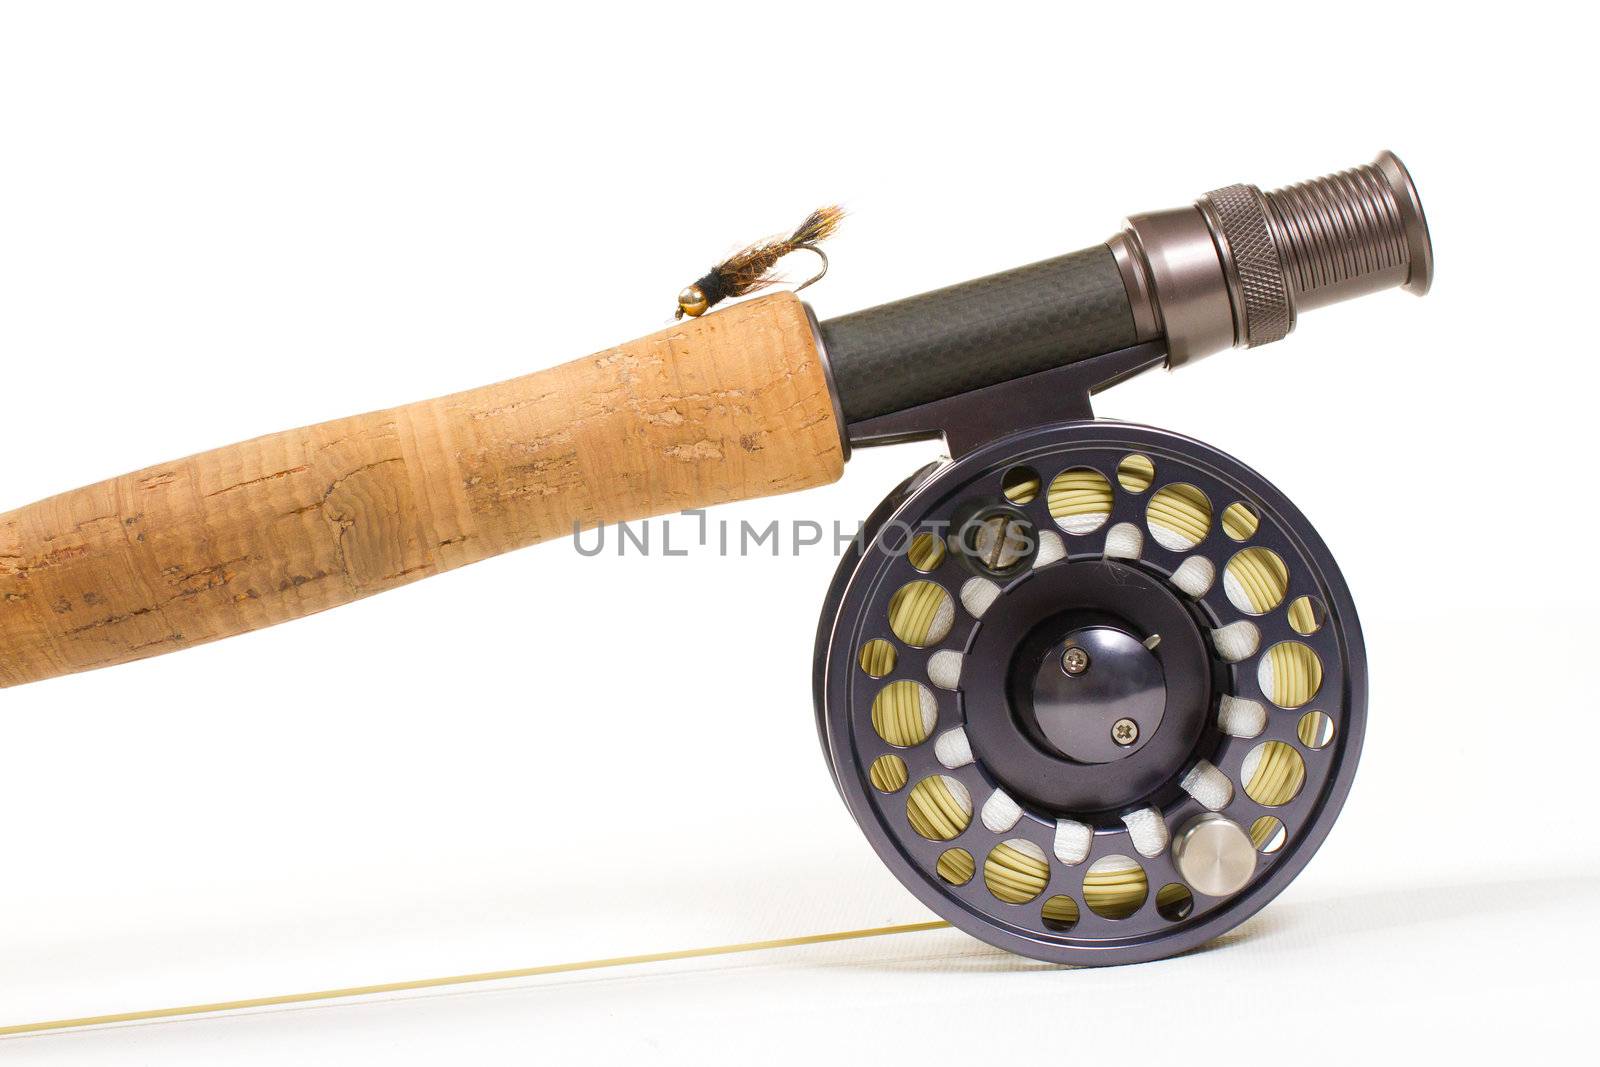 Fly Fishing Gear Rod and Reel by joshuaraineyphotography